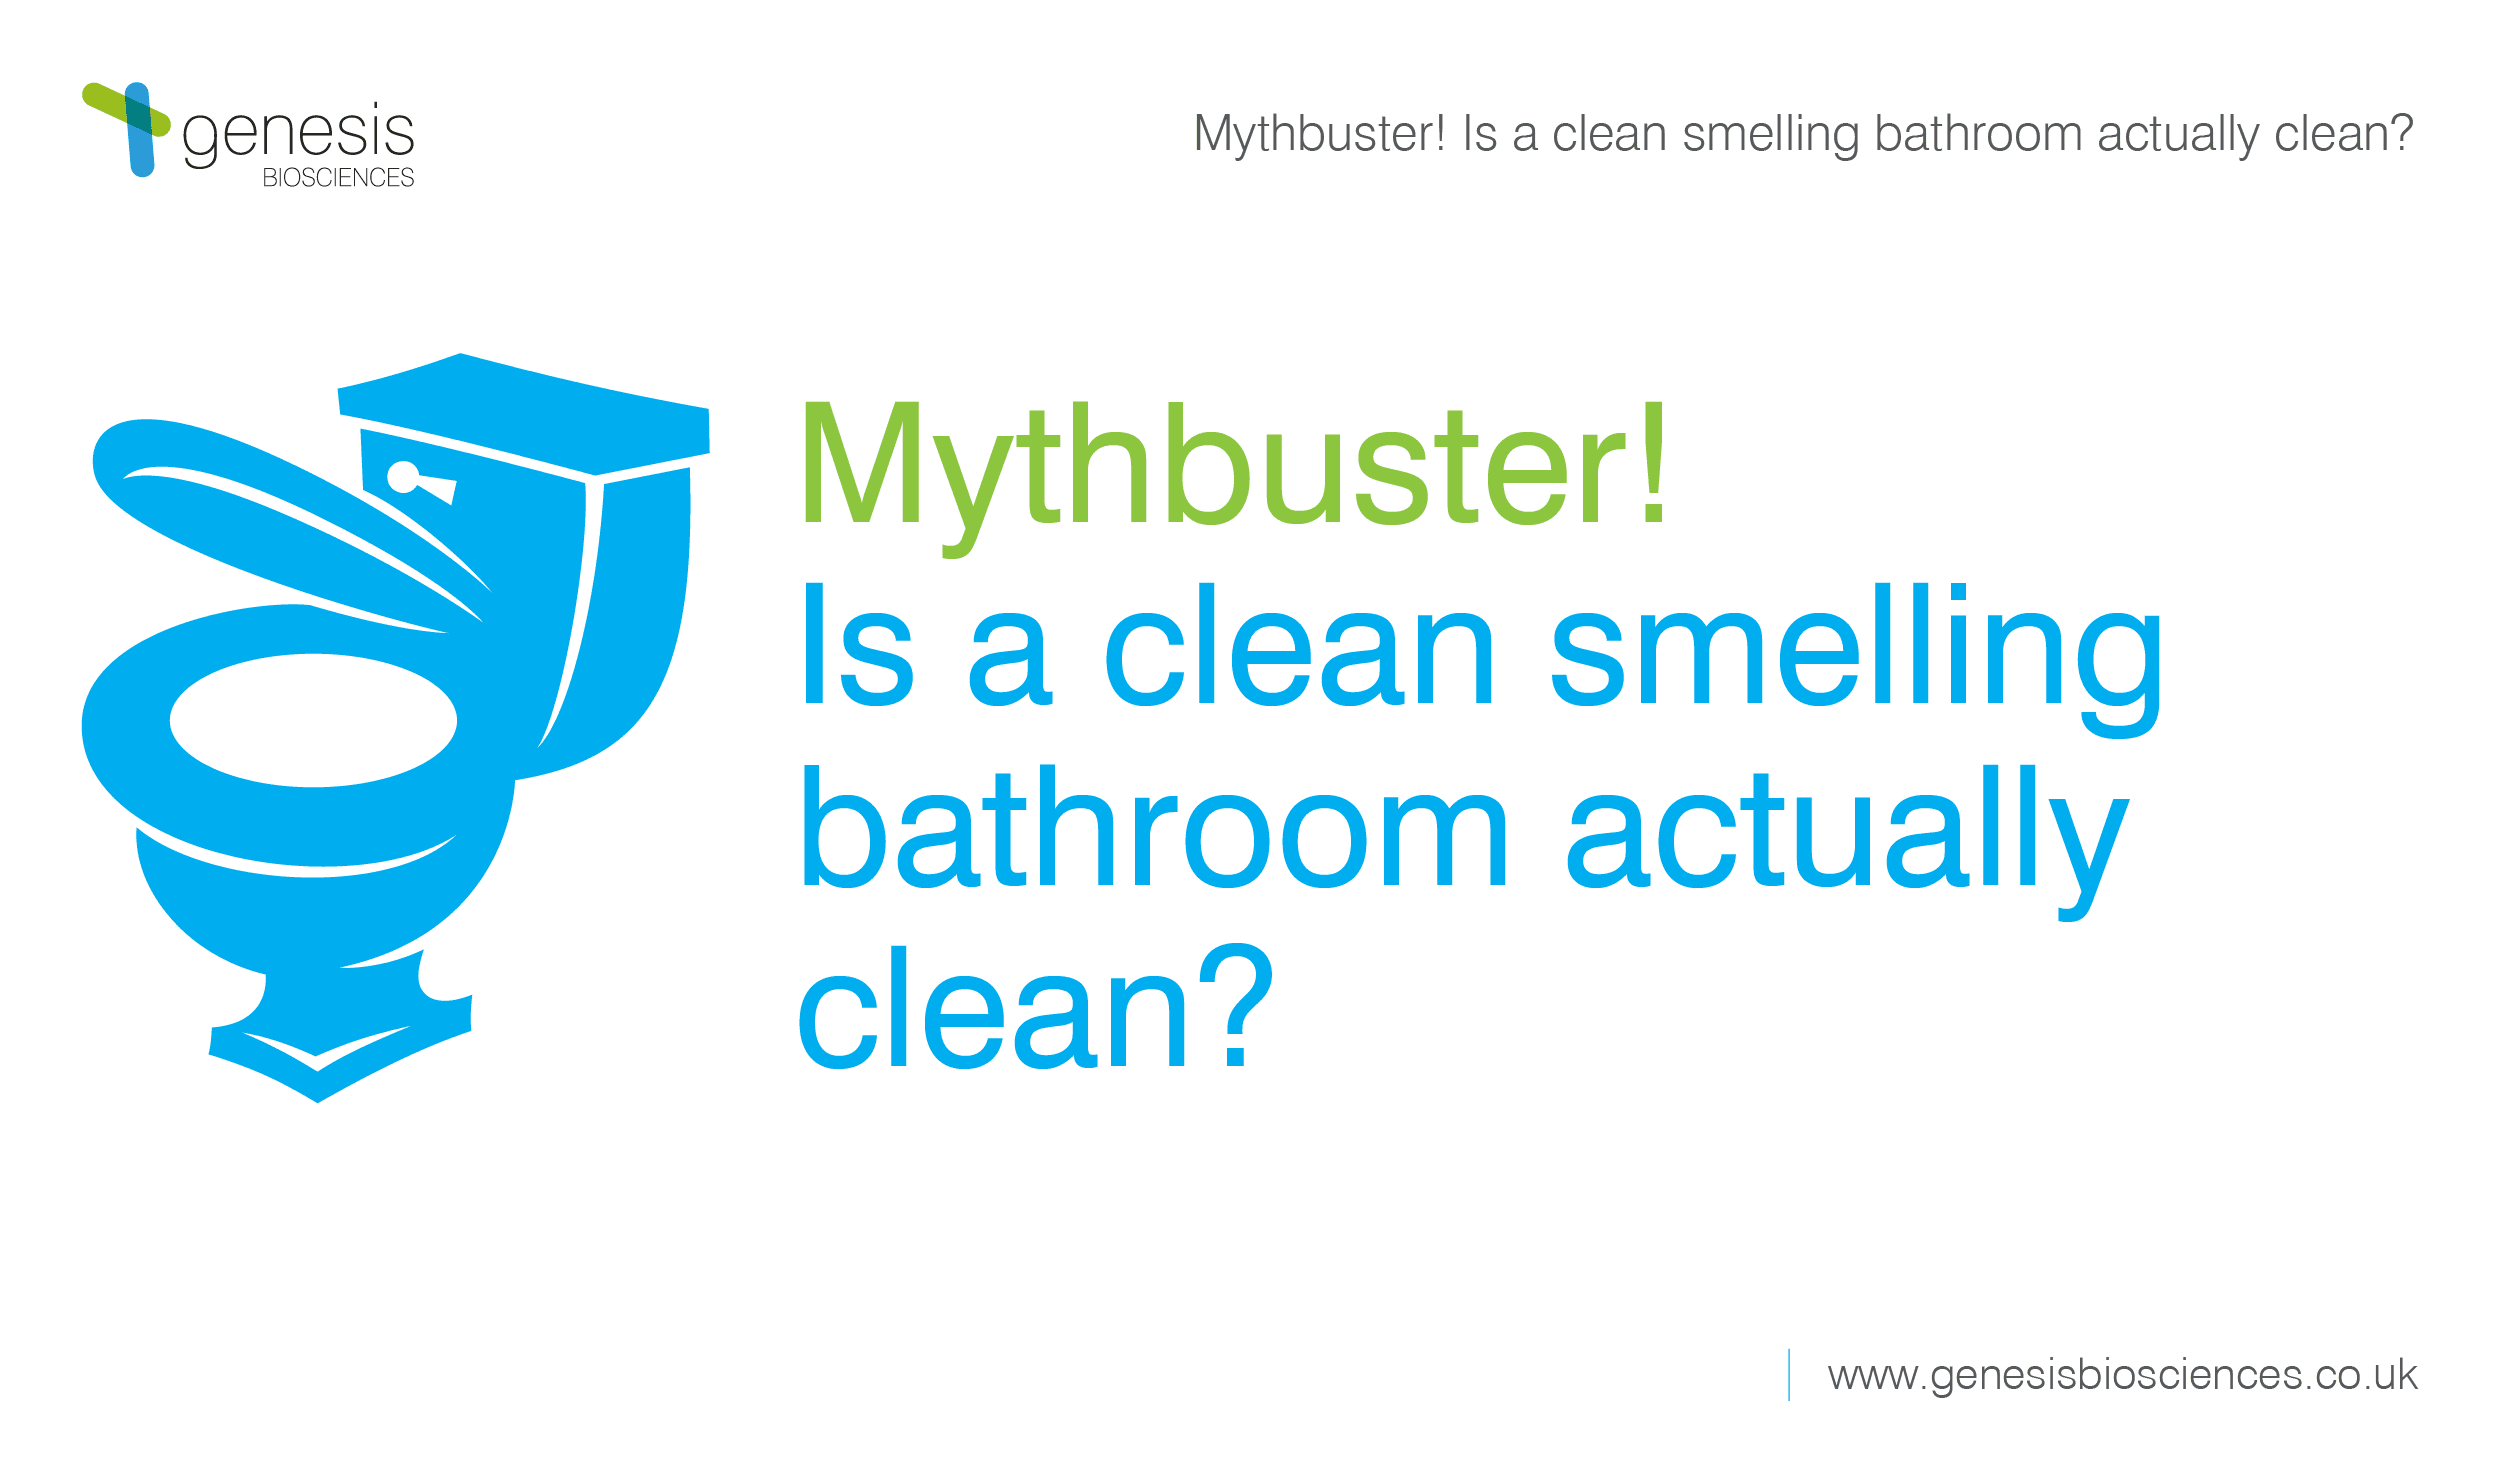 Mythbuster: Is a clean smelling bathroom actually clean?